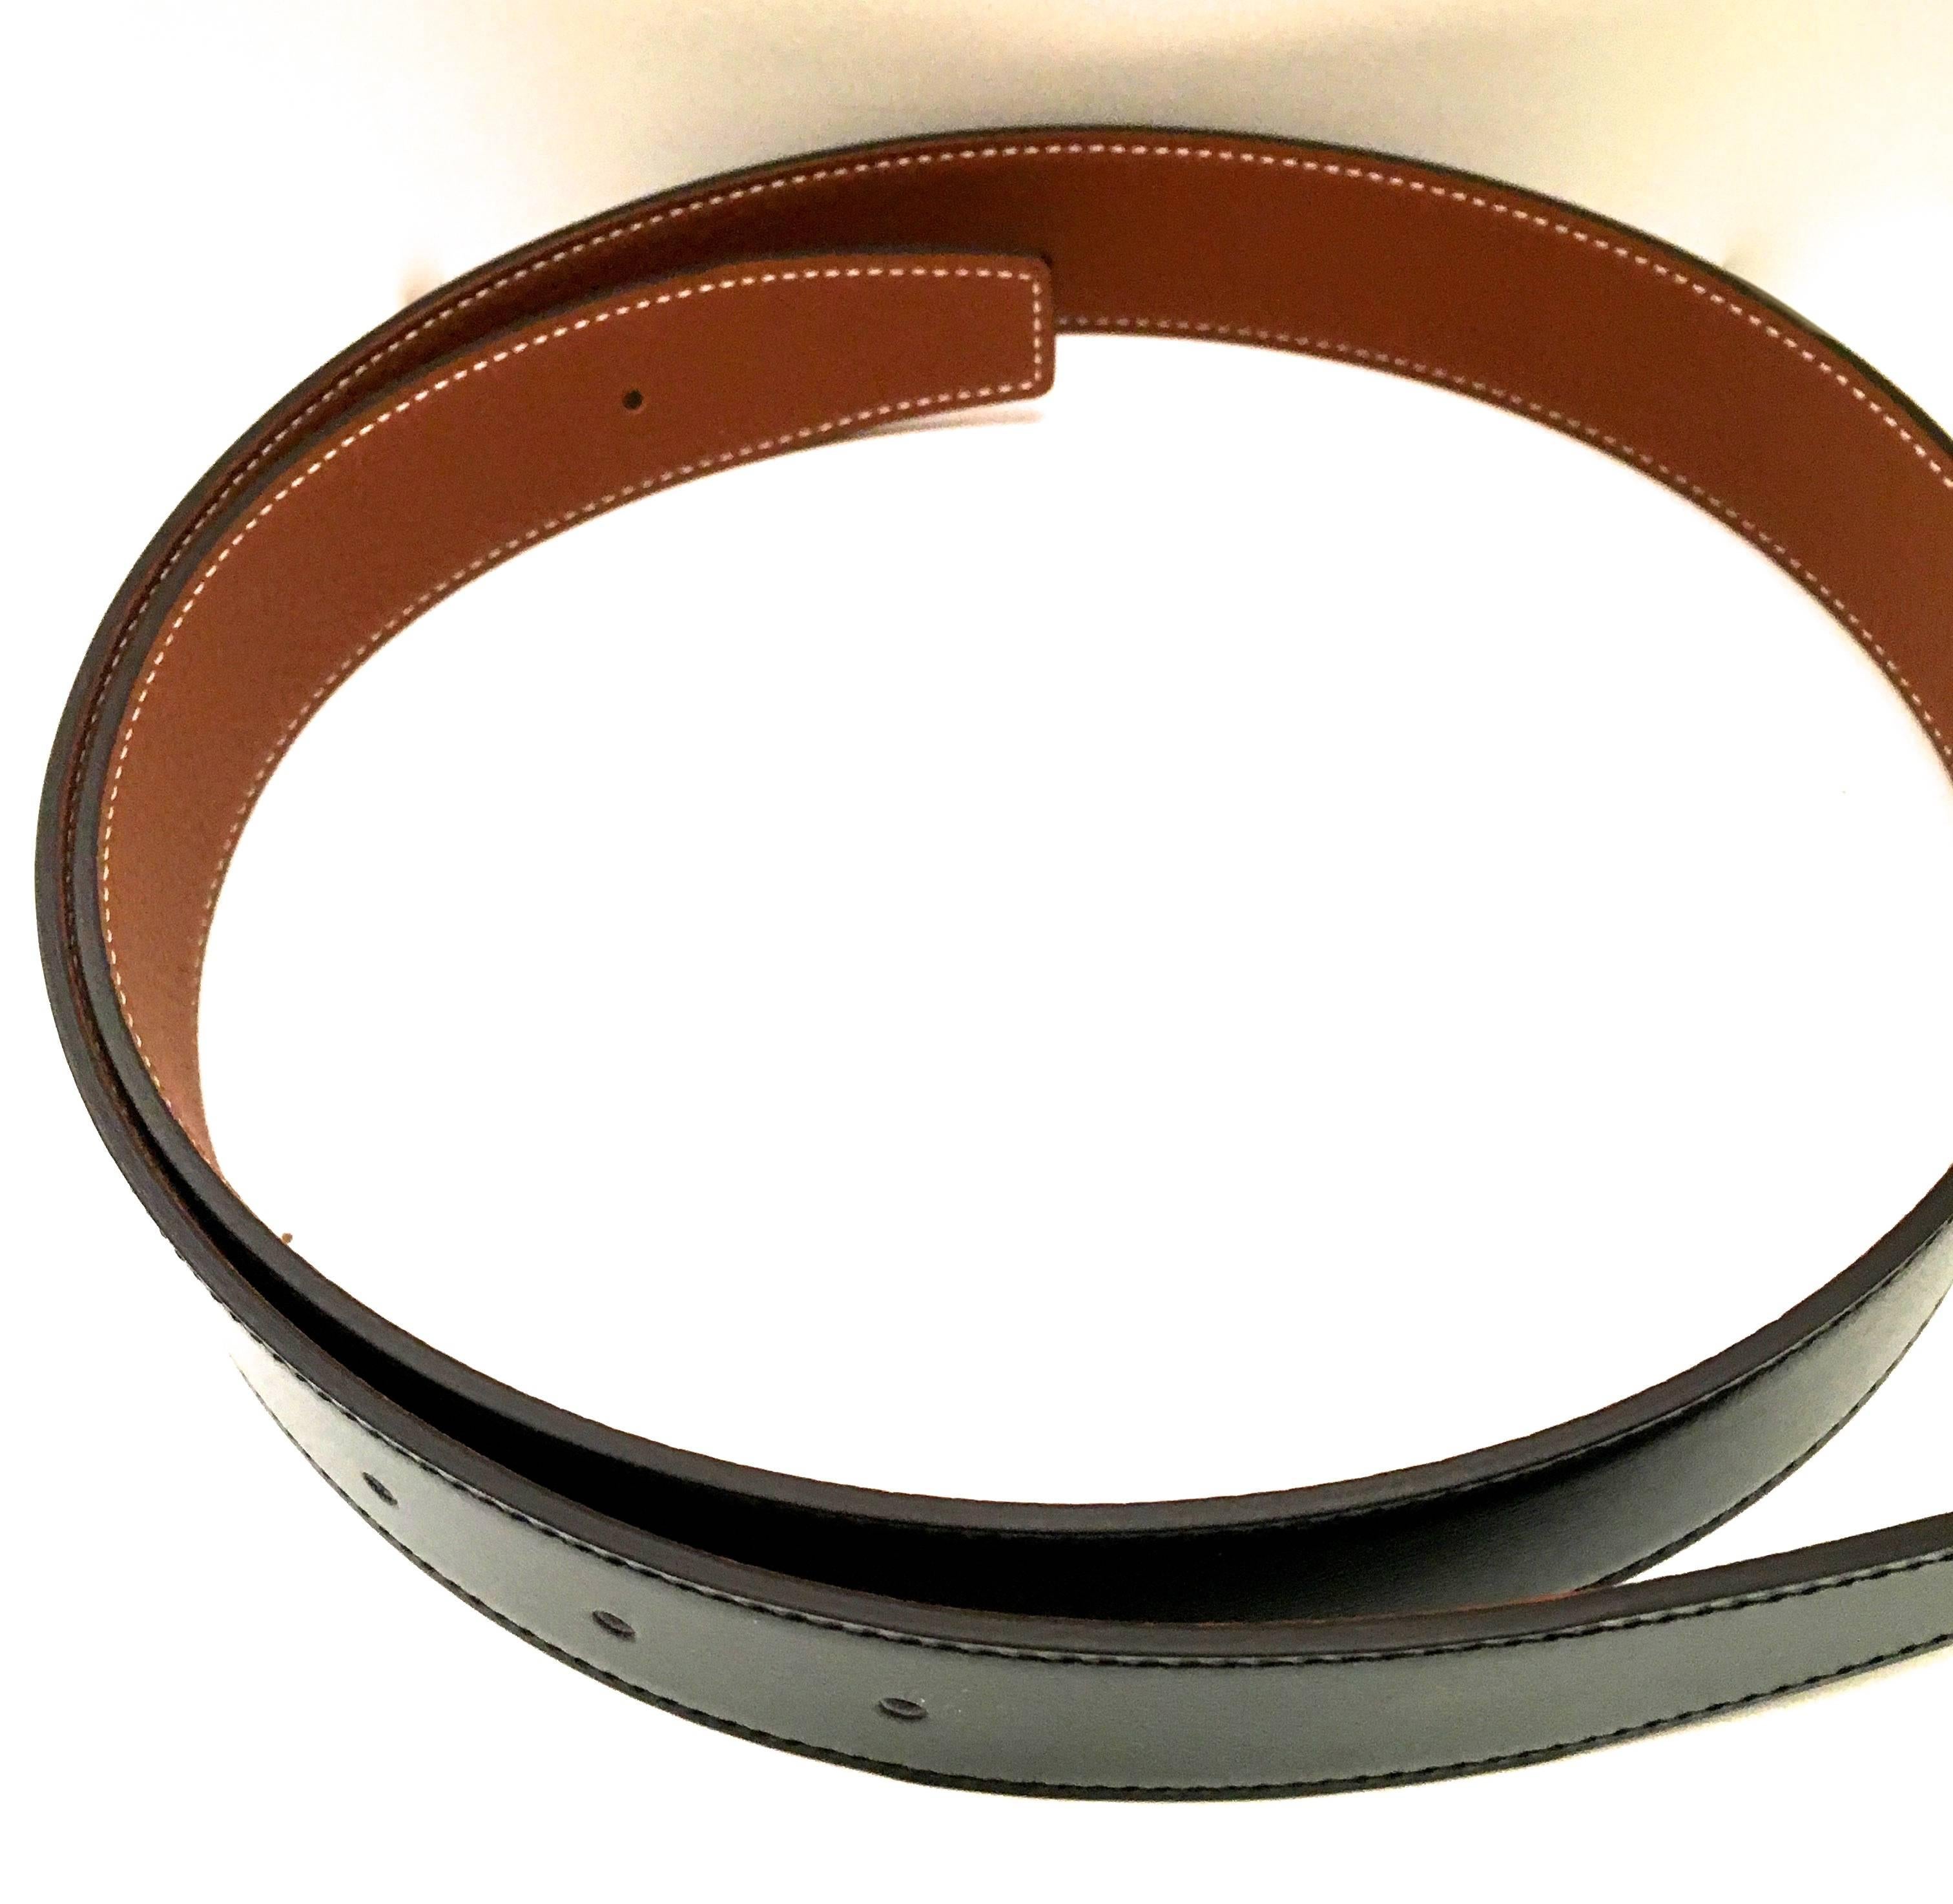 Presented here is a leather belt strap from Hermes Paris. The strap is a size 85, which is 33.5 inches in total length. This leather strap is smooth black box leather on one side and gold clemence leather on the reverse side. The strap is fully